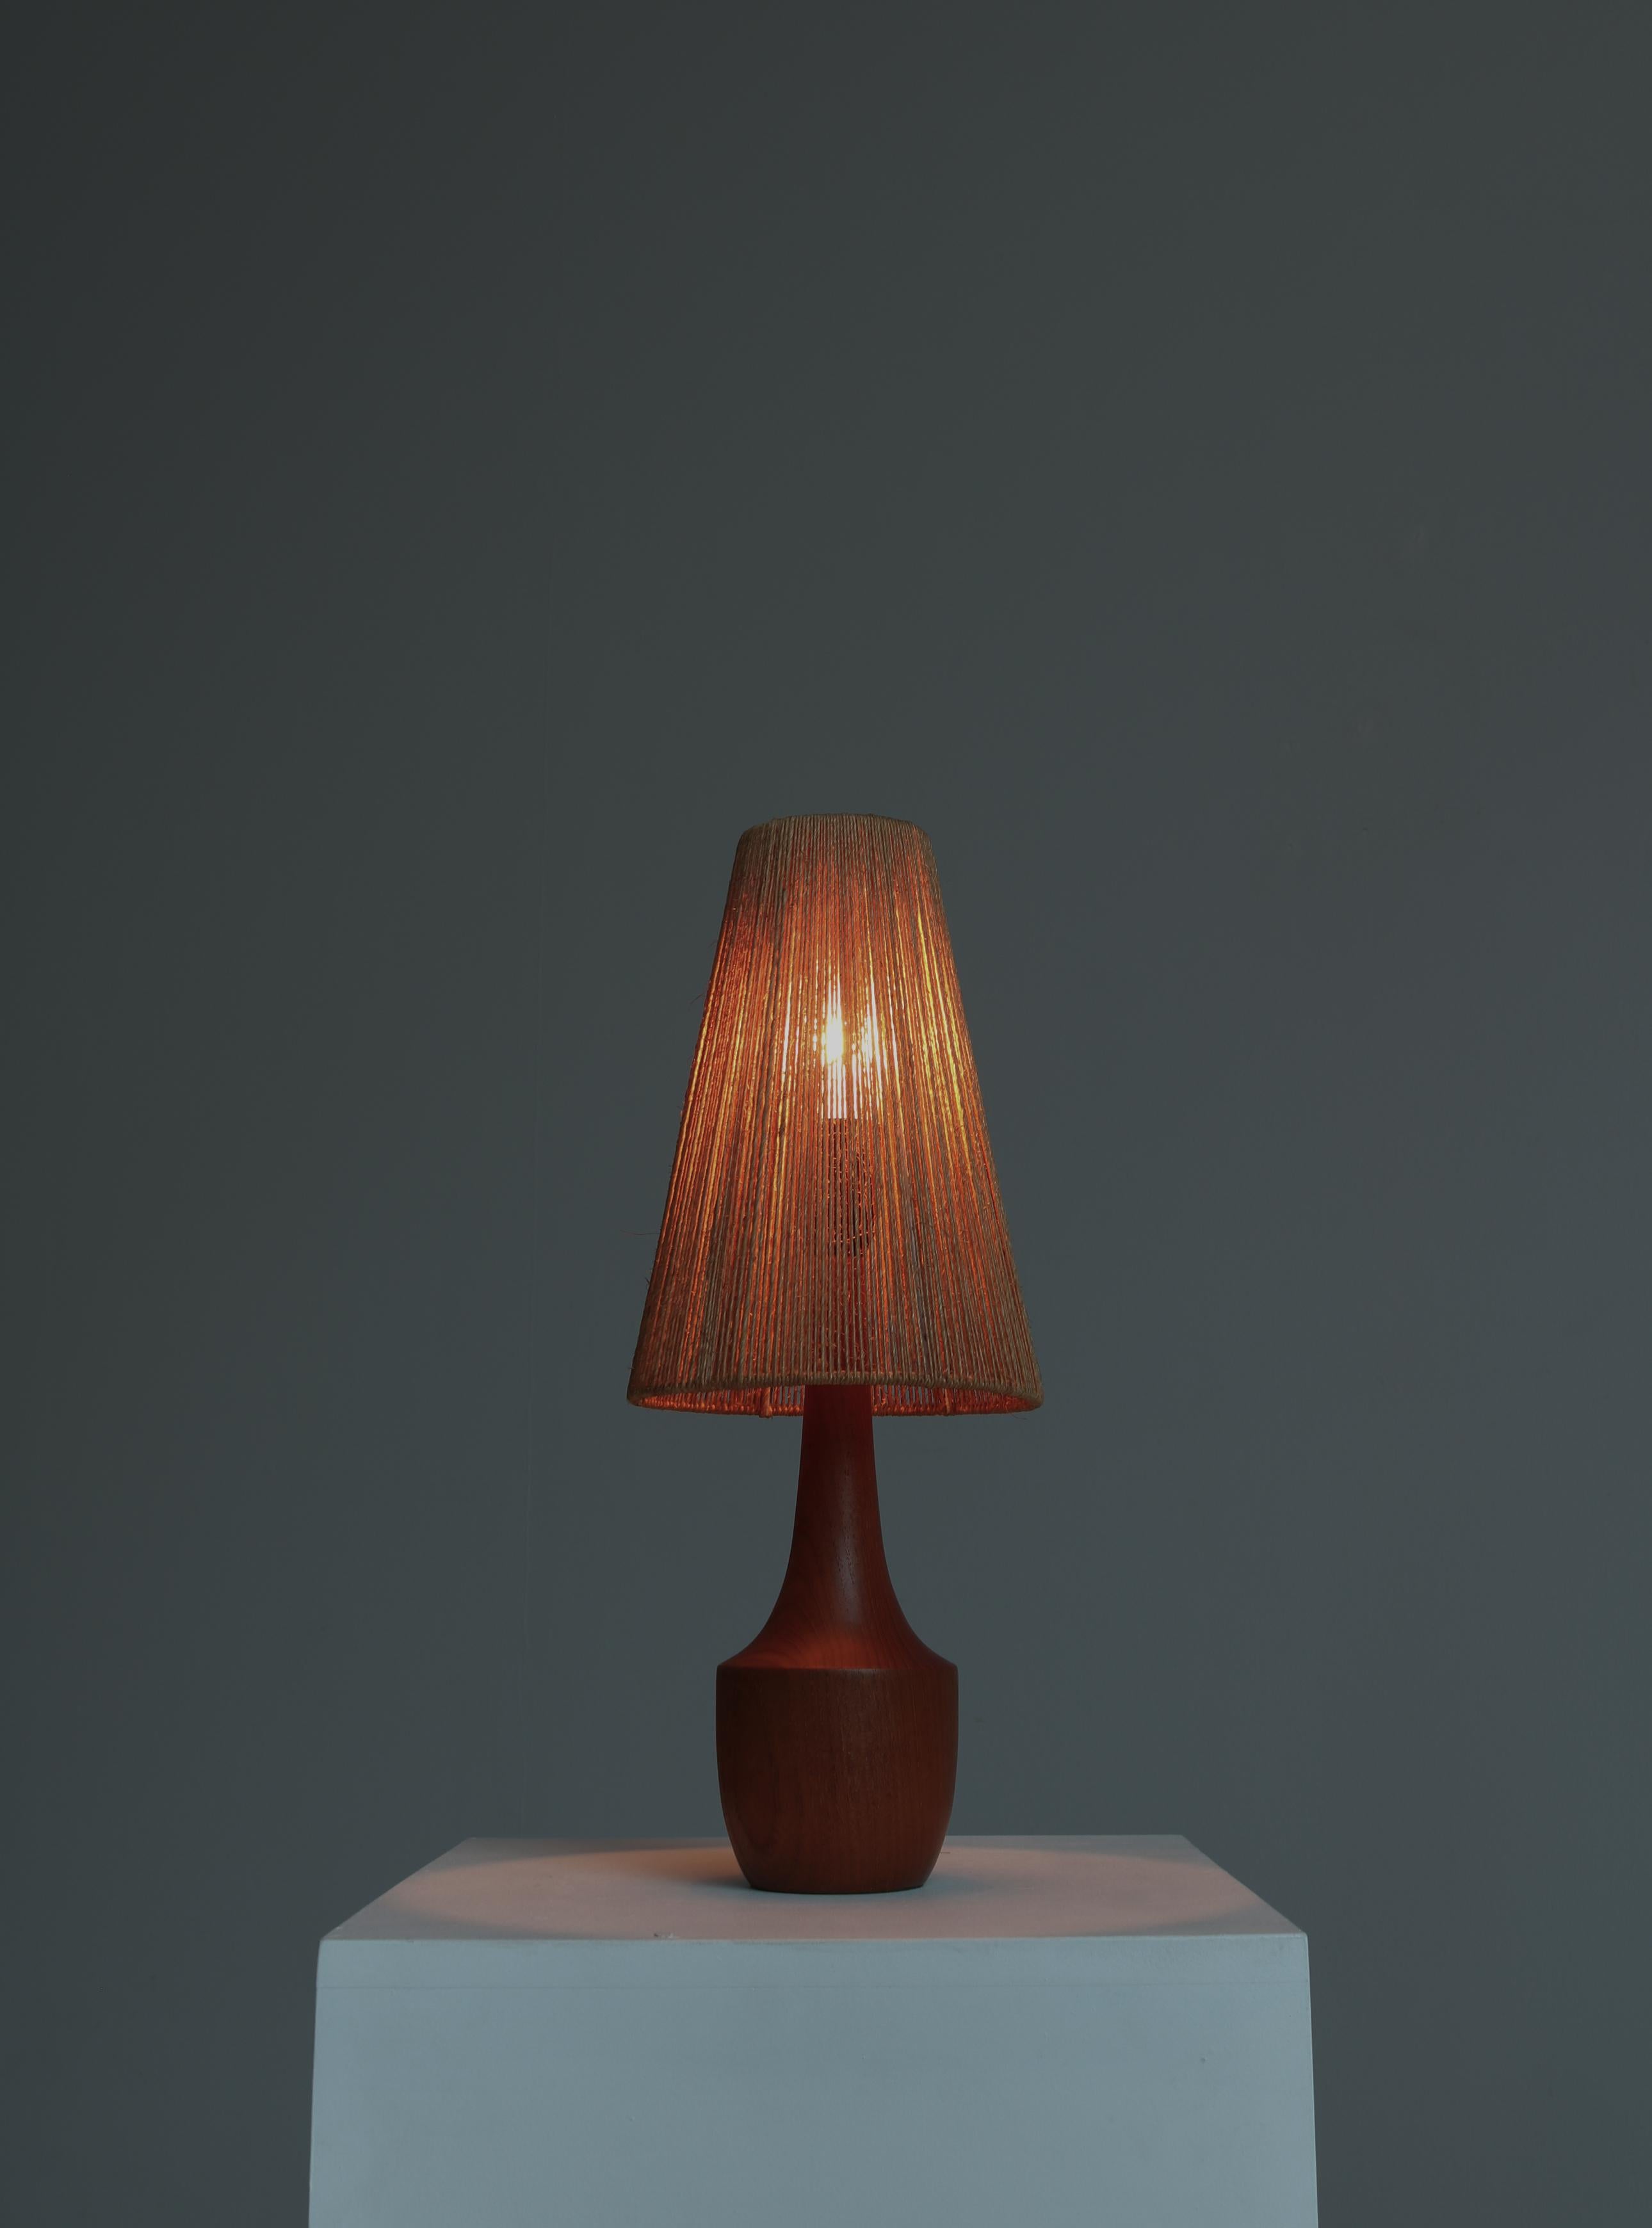 Mid-20th Century Danish Modern Table Lamp in Turned Teakwood and Sisal, 1950s For Sale